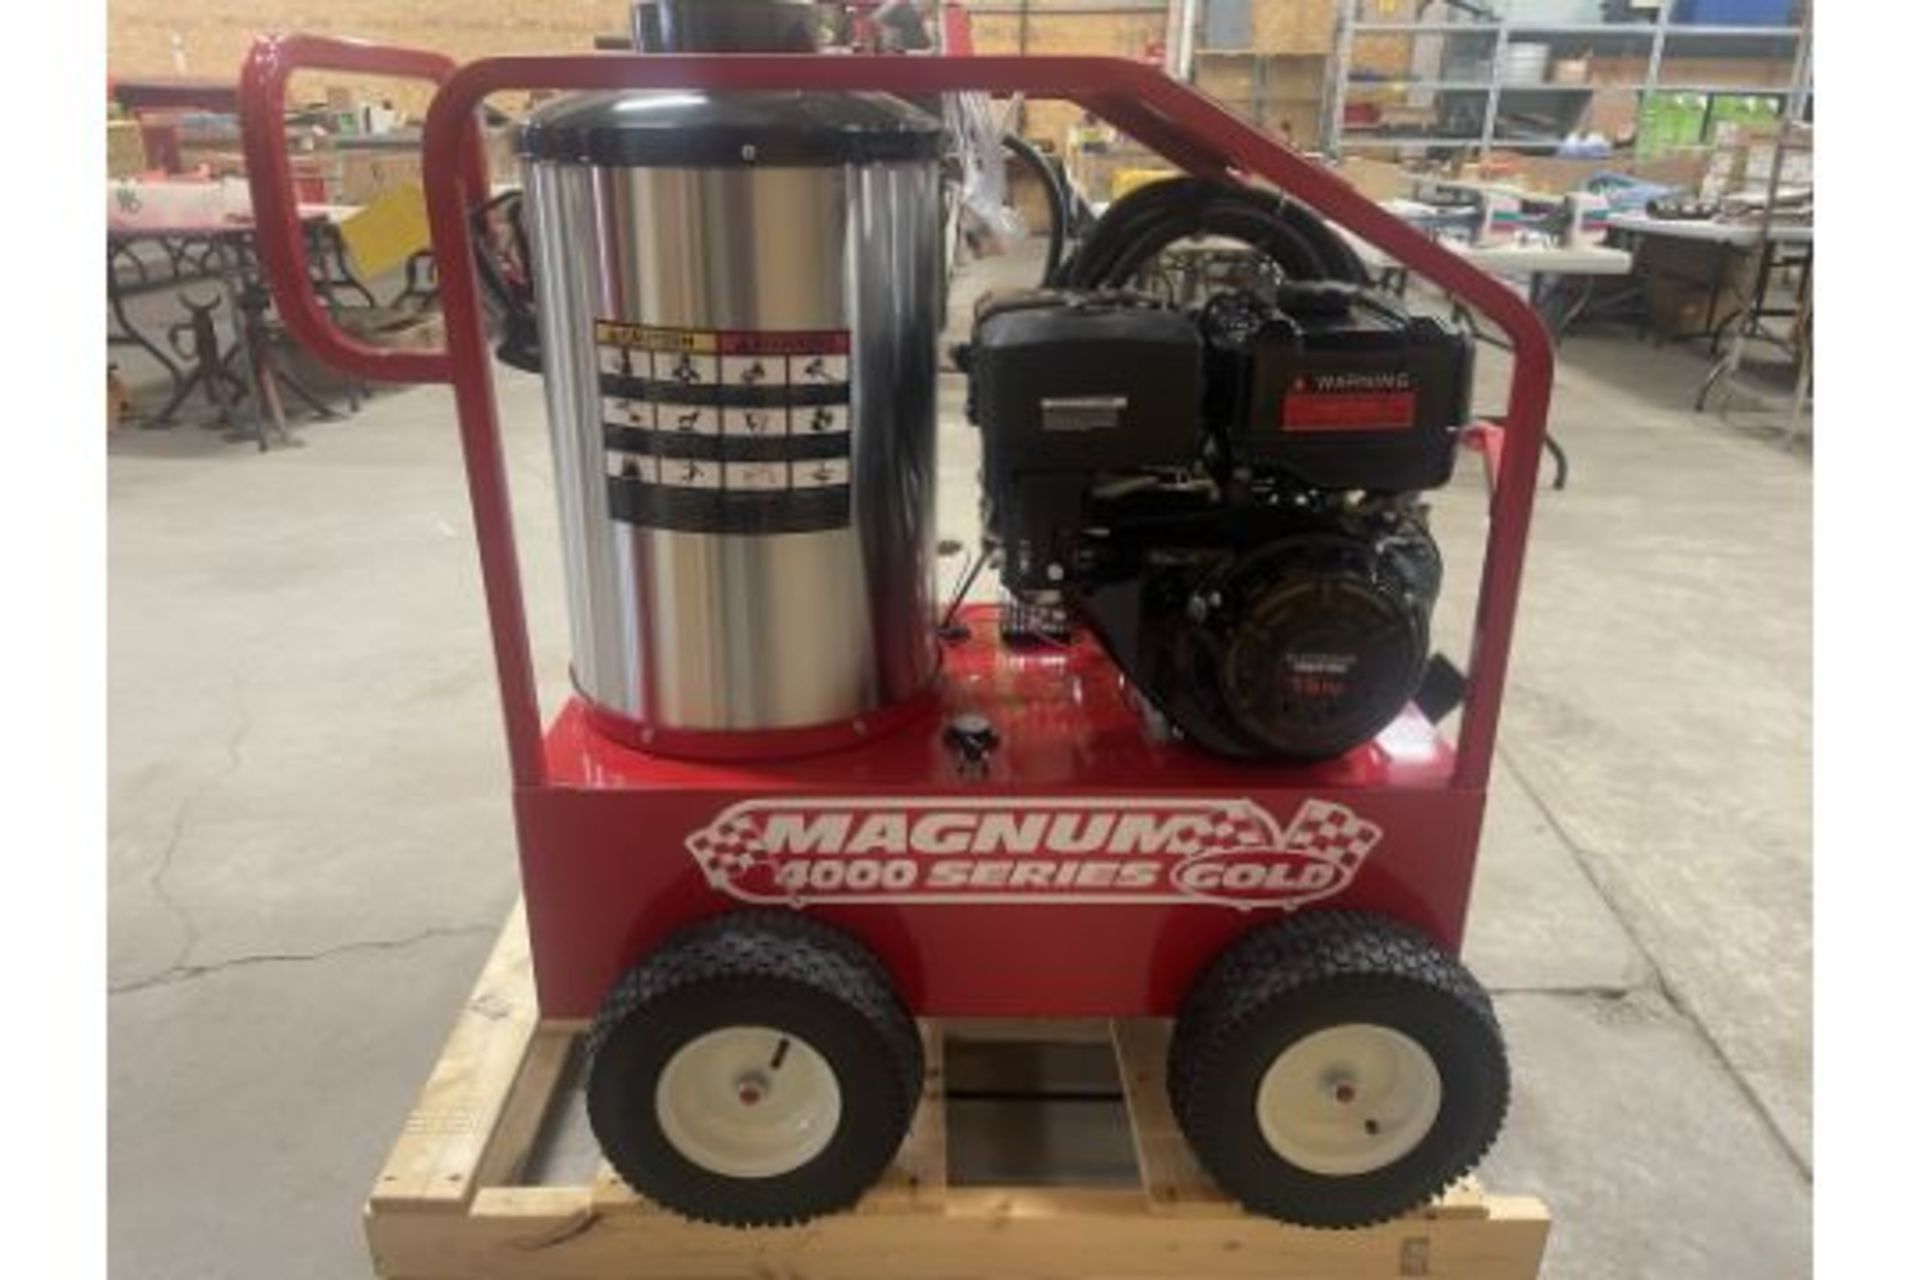 EASY KLEEN MAGNUM 4000 HOT WATER PRESSURE WASHER, - NOTE "NO OIL IN ENGINE OR PUMP" - Image 5 of 9